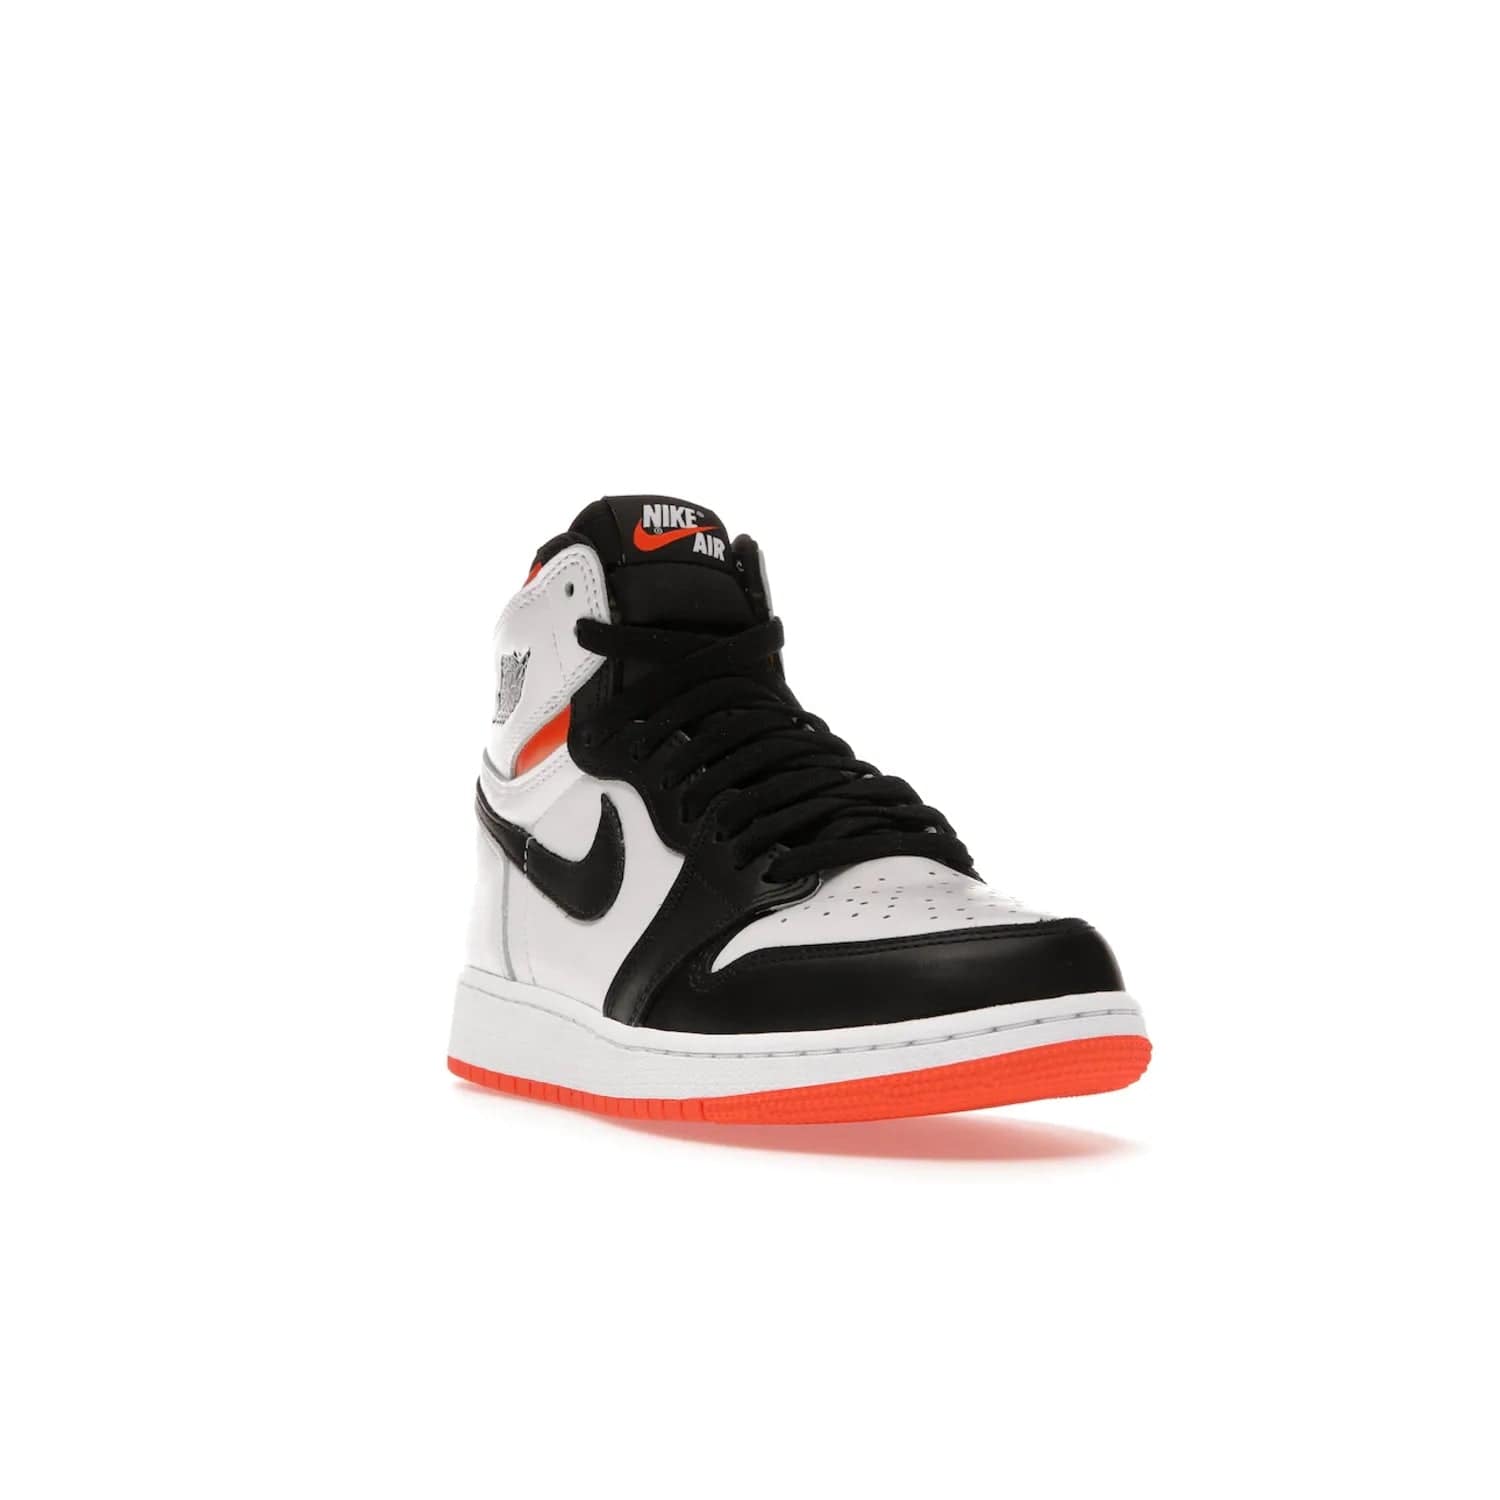 Jordan 1 High OG Electro Orange (GS) - Image 7 - Only at www.BallersClubKickz.com - The Air Jordan 1 High OG Electro Orange GS is the ideal shoe for kids on the go. Featuring white leather uppers, black overlays, and bright orange accents, it's sure to become a favorite. A great mix of classic style and vibrant colors, the shoe delivers air cushioning for comfort and hard orange rubber for grip. Release on July 17th, 2021. Get them a pair today.